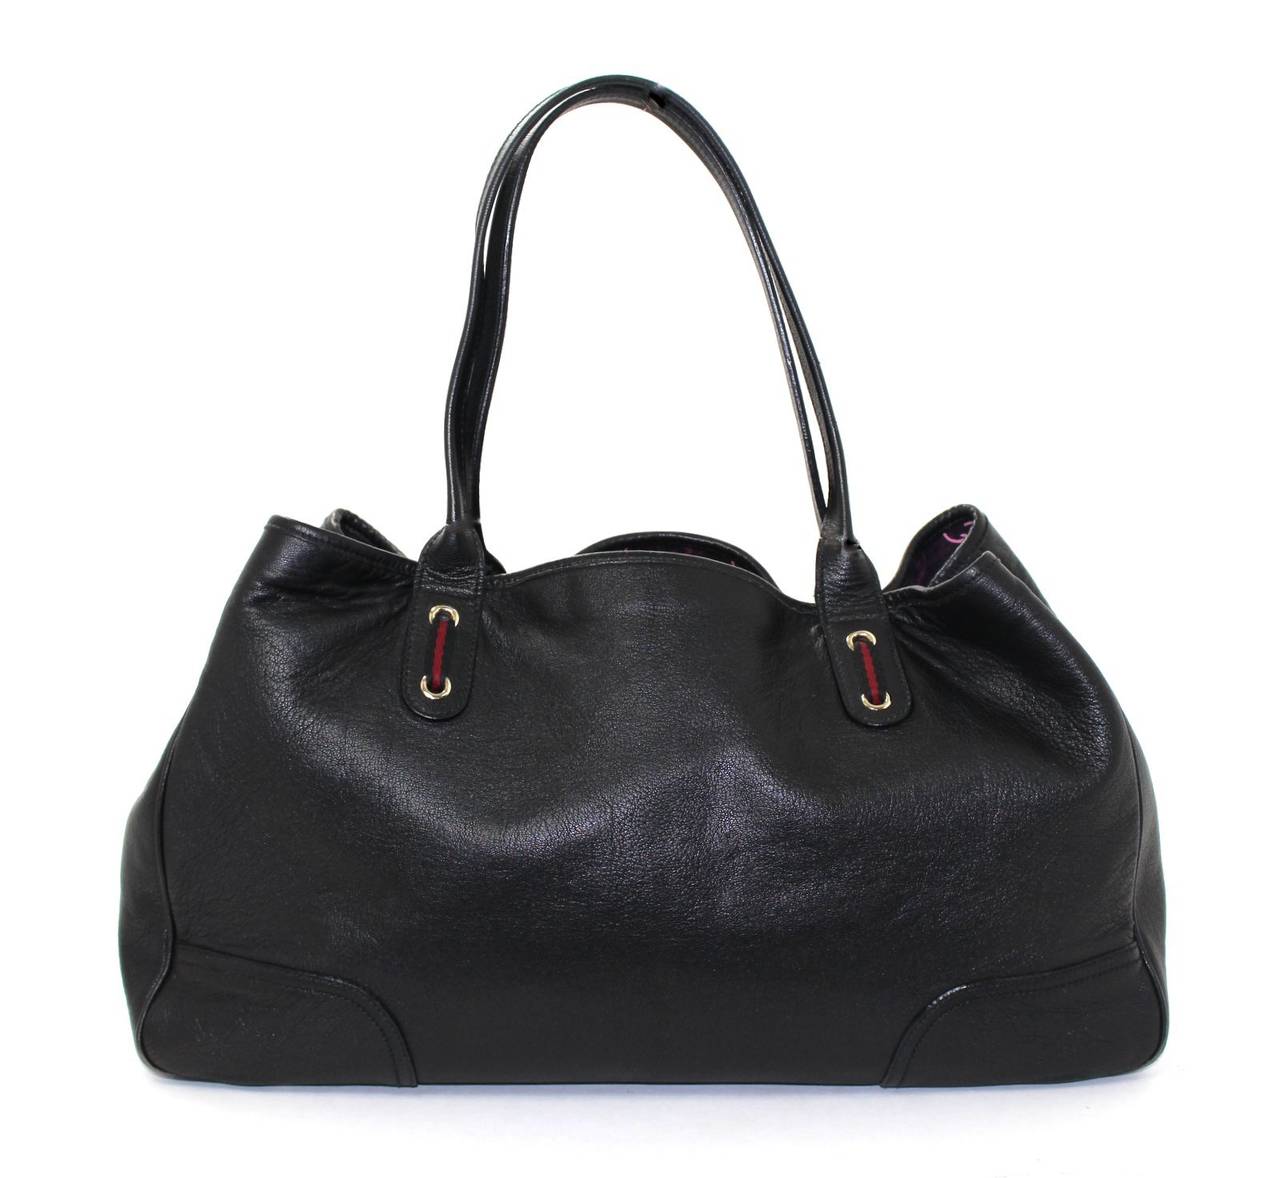 Gucci Large  Black Leather Tote - a great find in very good condition overall.  Very clean interior, exterior leather beautiful.  There is wear on all four corners; please see close up photographs. 
Roomy black leather tote has a soft texture and